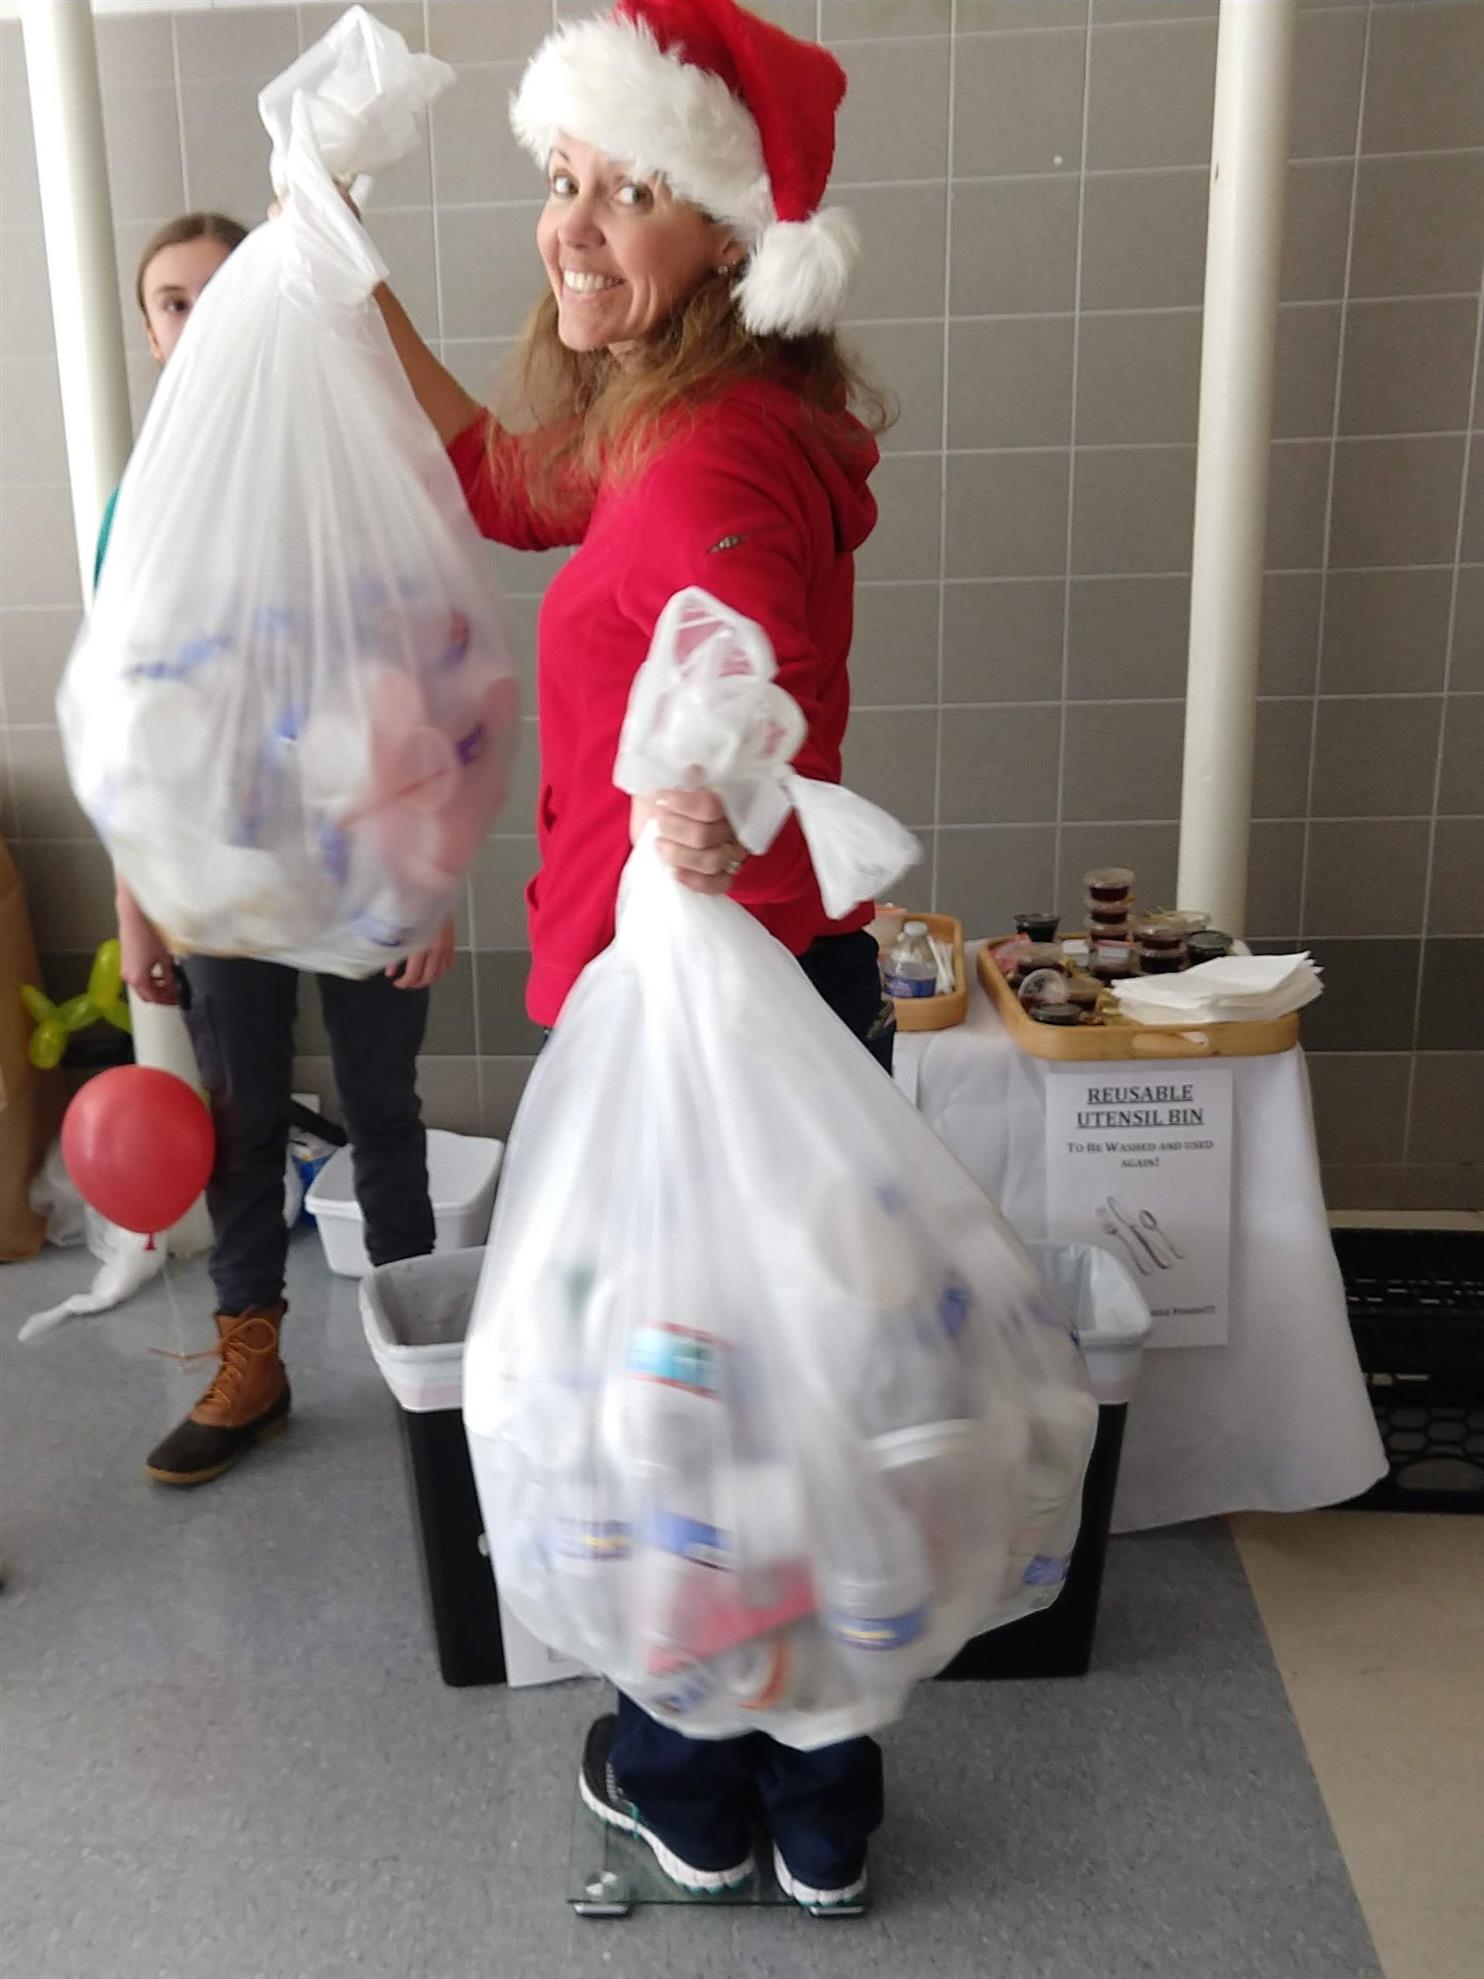 Lisa Warhover weighs the amount of recycling diverted from the landfill